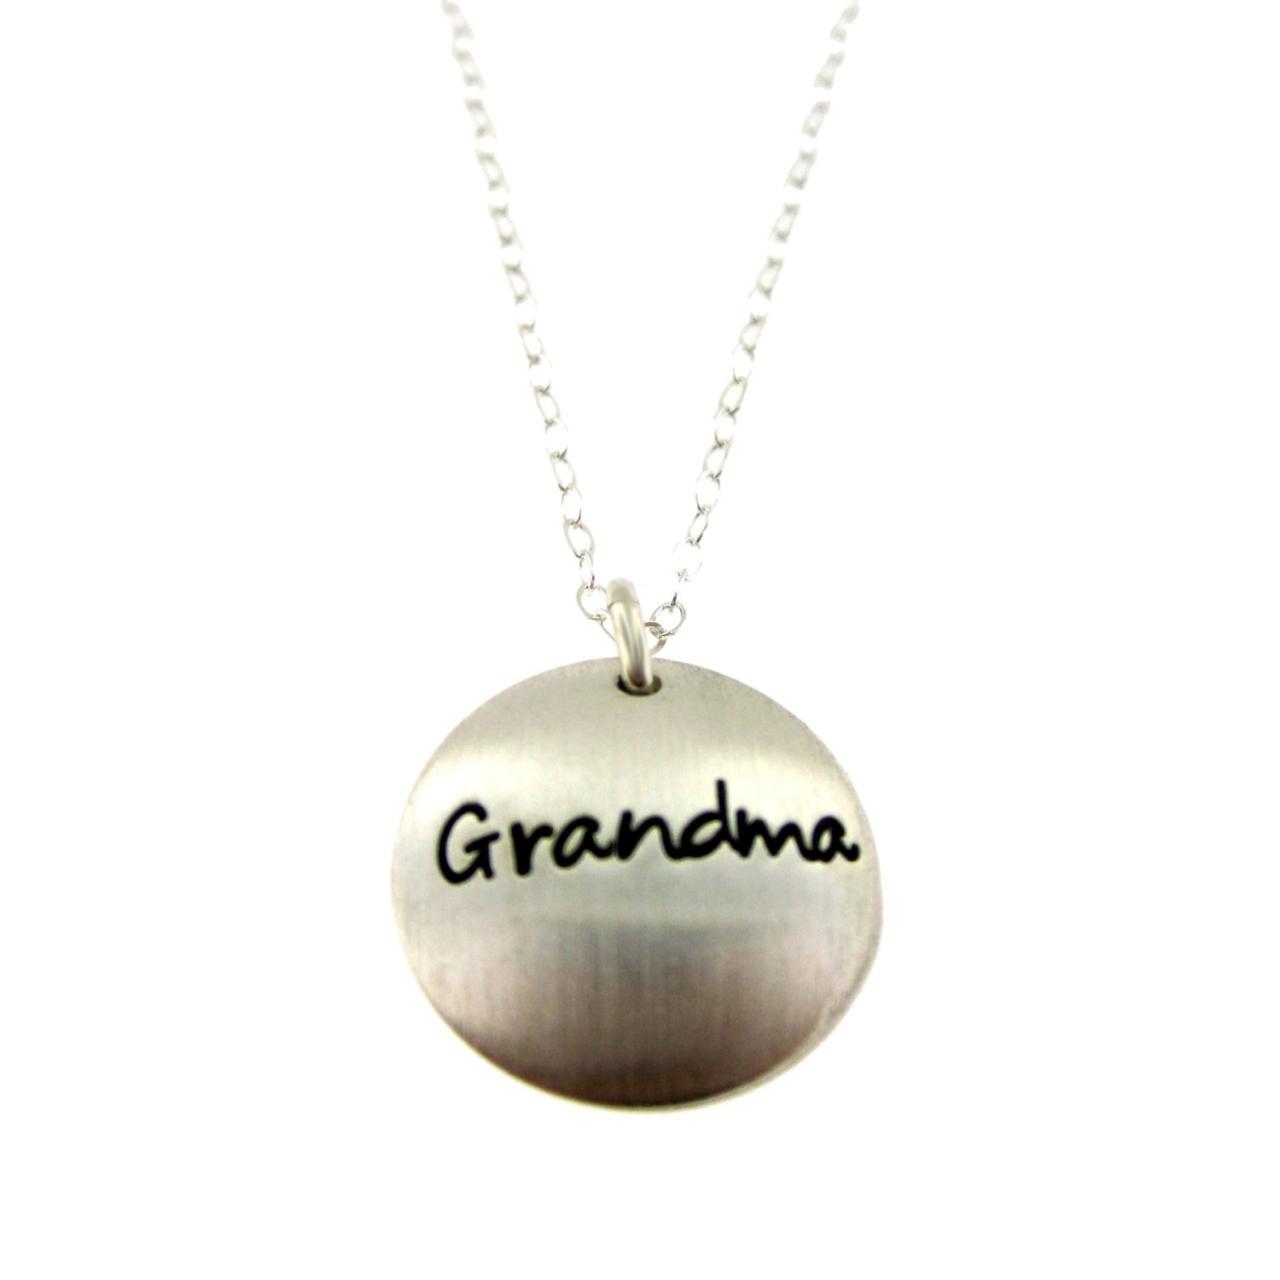 Proud Grandma Personalized Necklace - Secret Message On The Inside - Sterling Silver Hand Stamped Locket